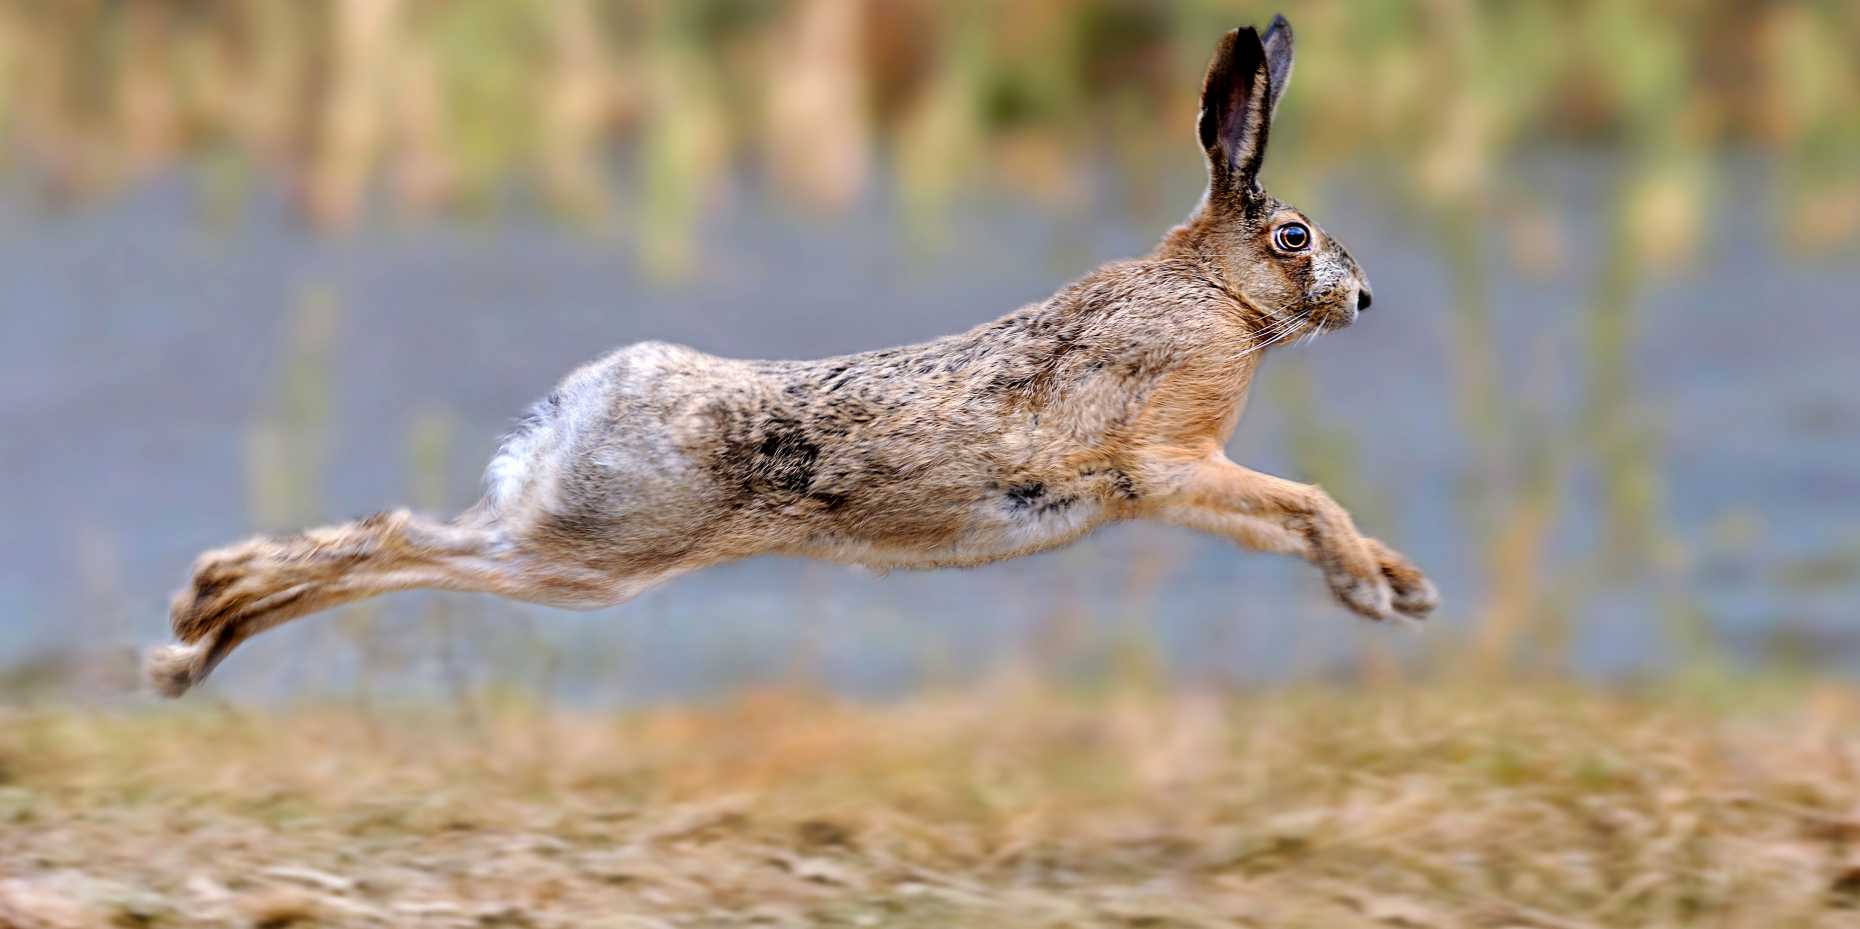 Enlarged view: Hare